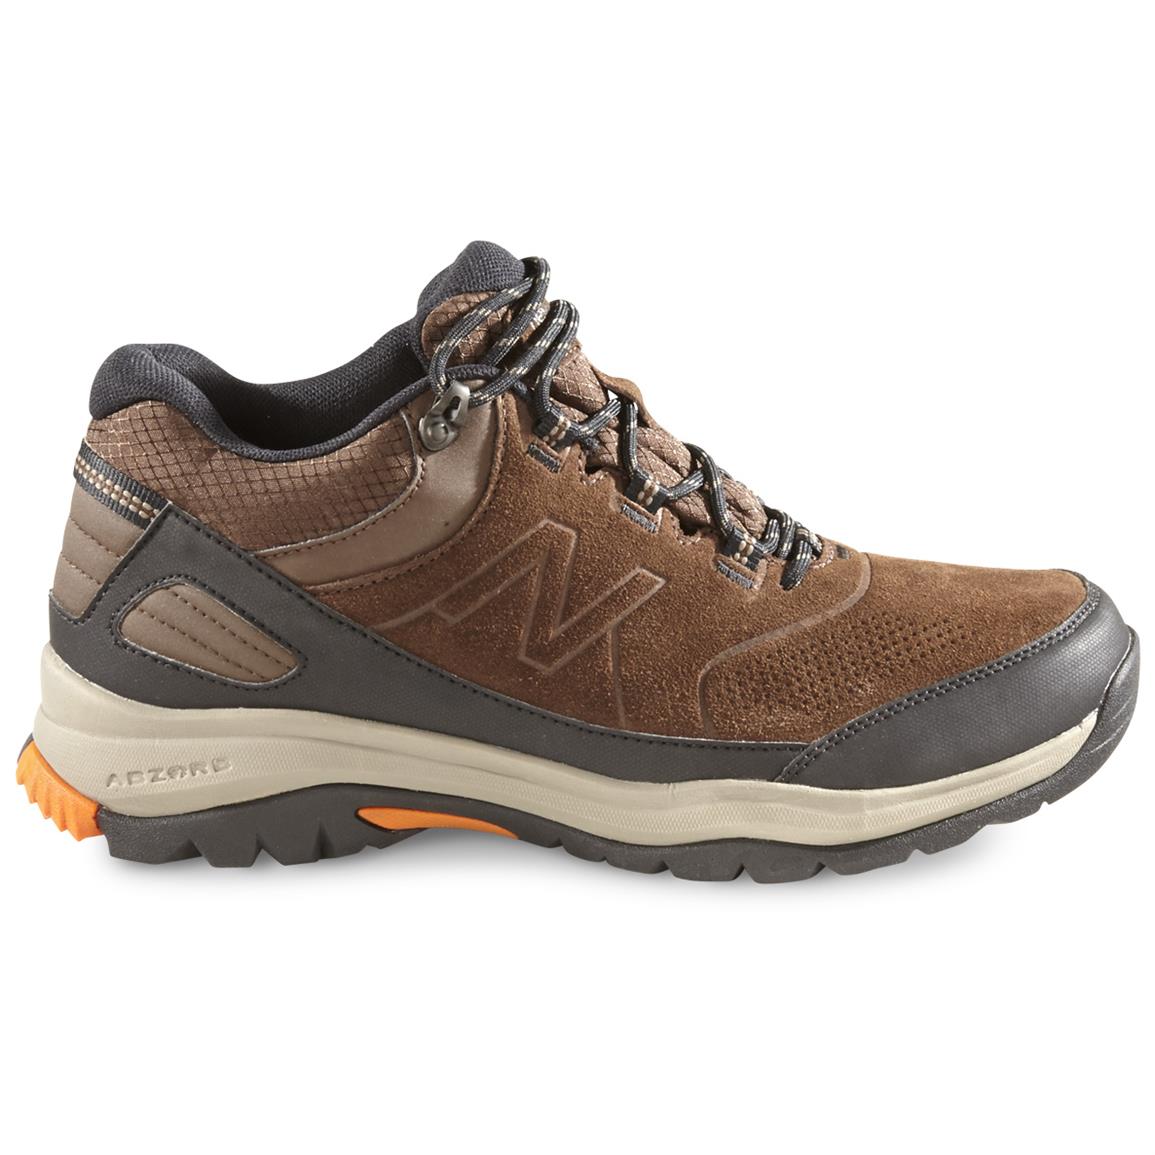 New Balance Men's 779v1 Hiking Shoes - 666184, Hiking Boots & Shoes at ...